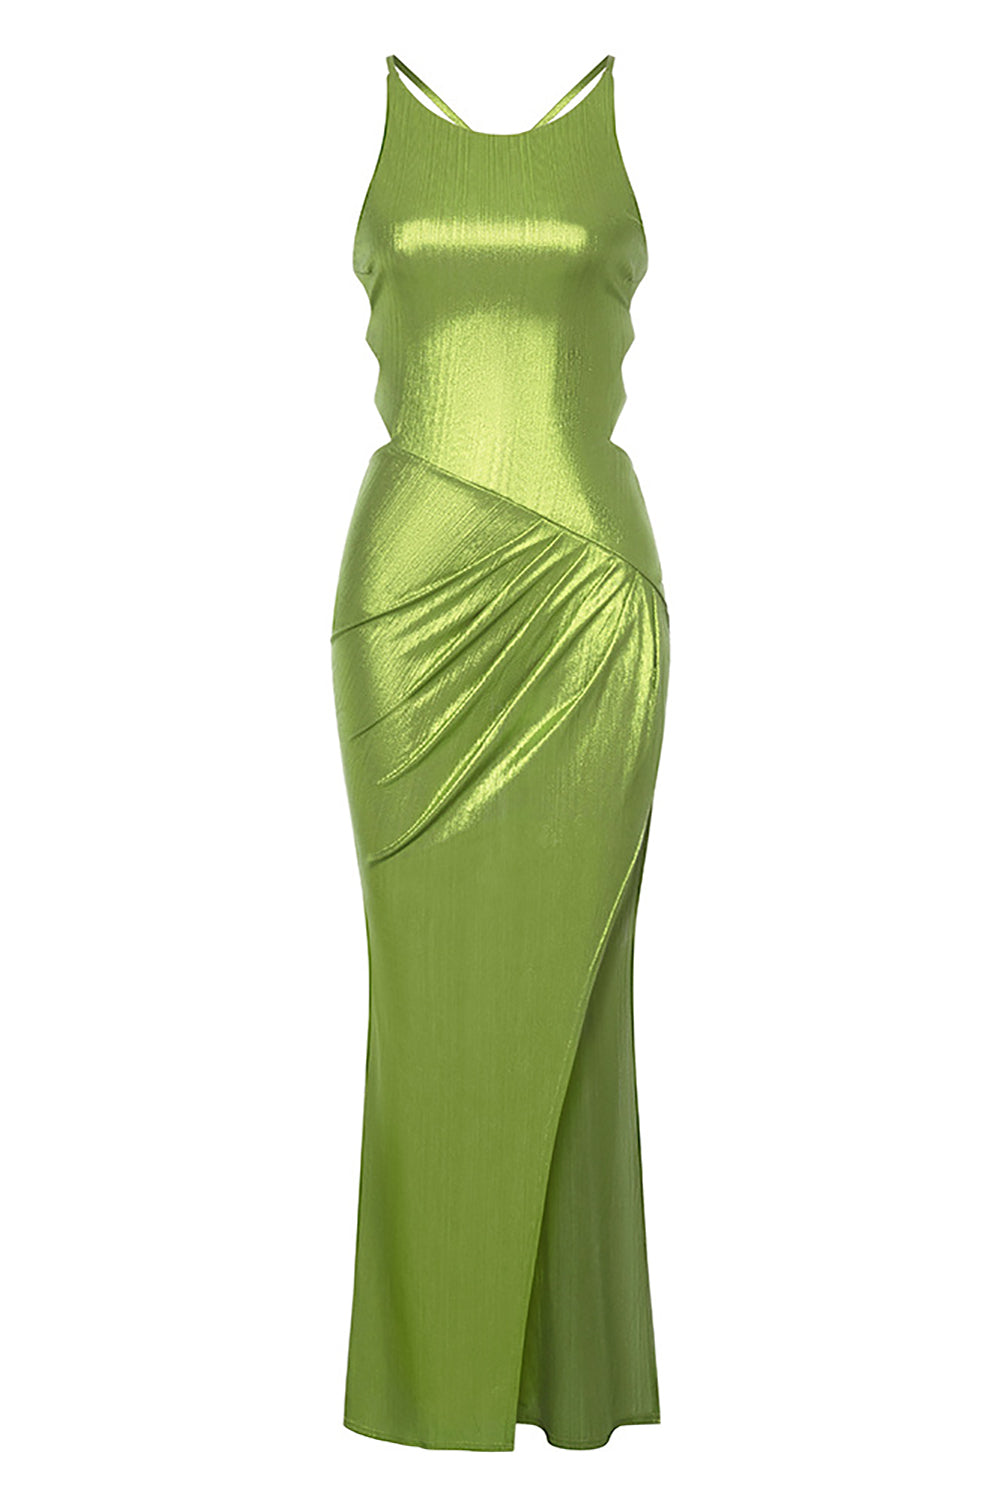 Green Sleeveless Lace Up Back Cocktail Dress With Slit